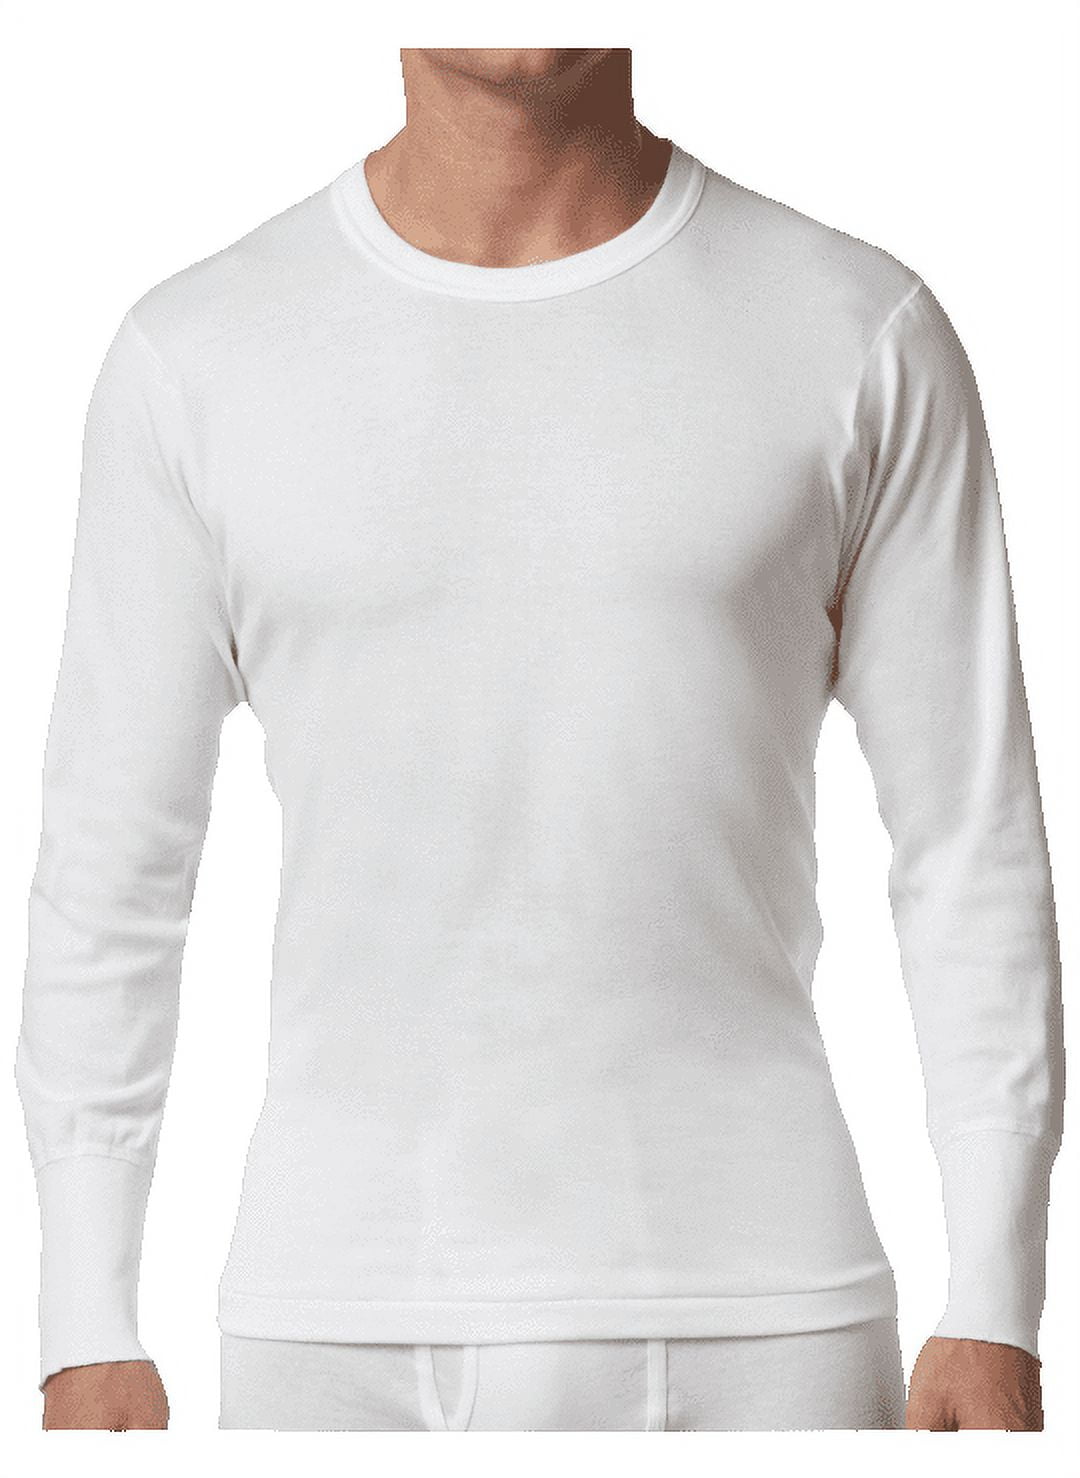 Stanfield's Adult Mens Premium Cotton Rib Long Sleeve Thermal Top, Sizes,  S-3XL 